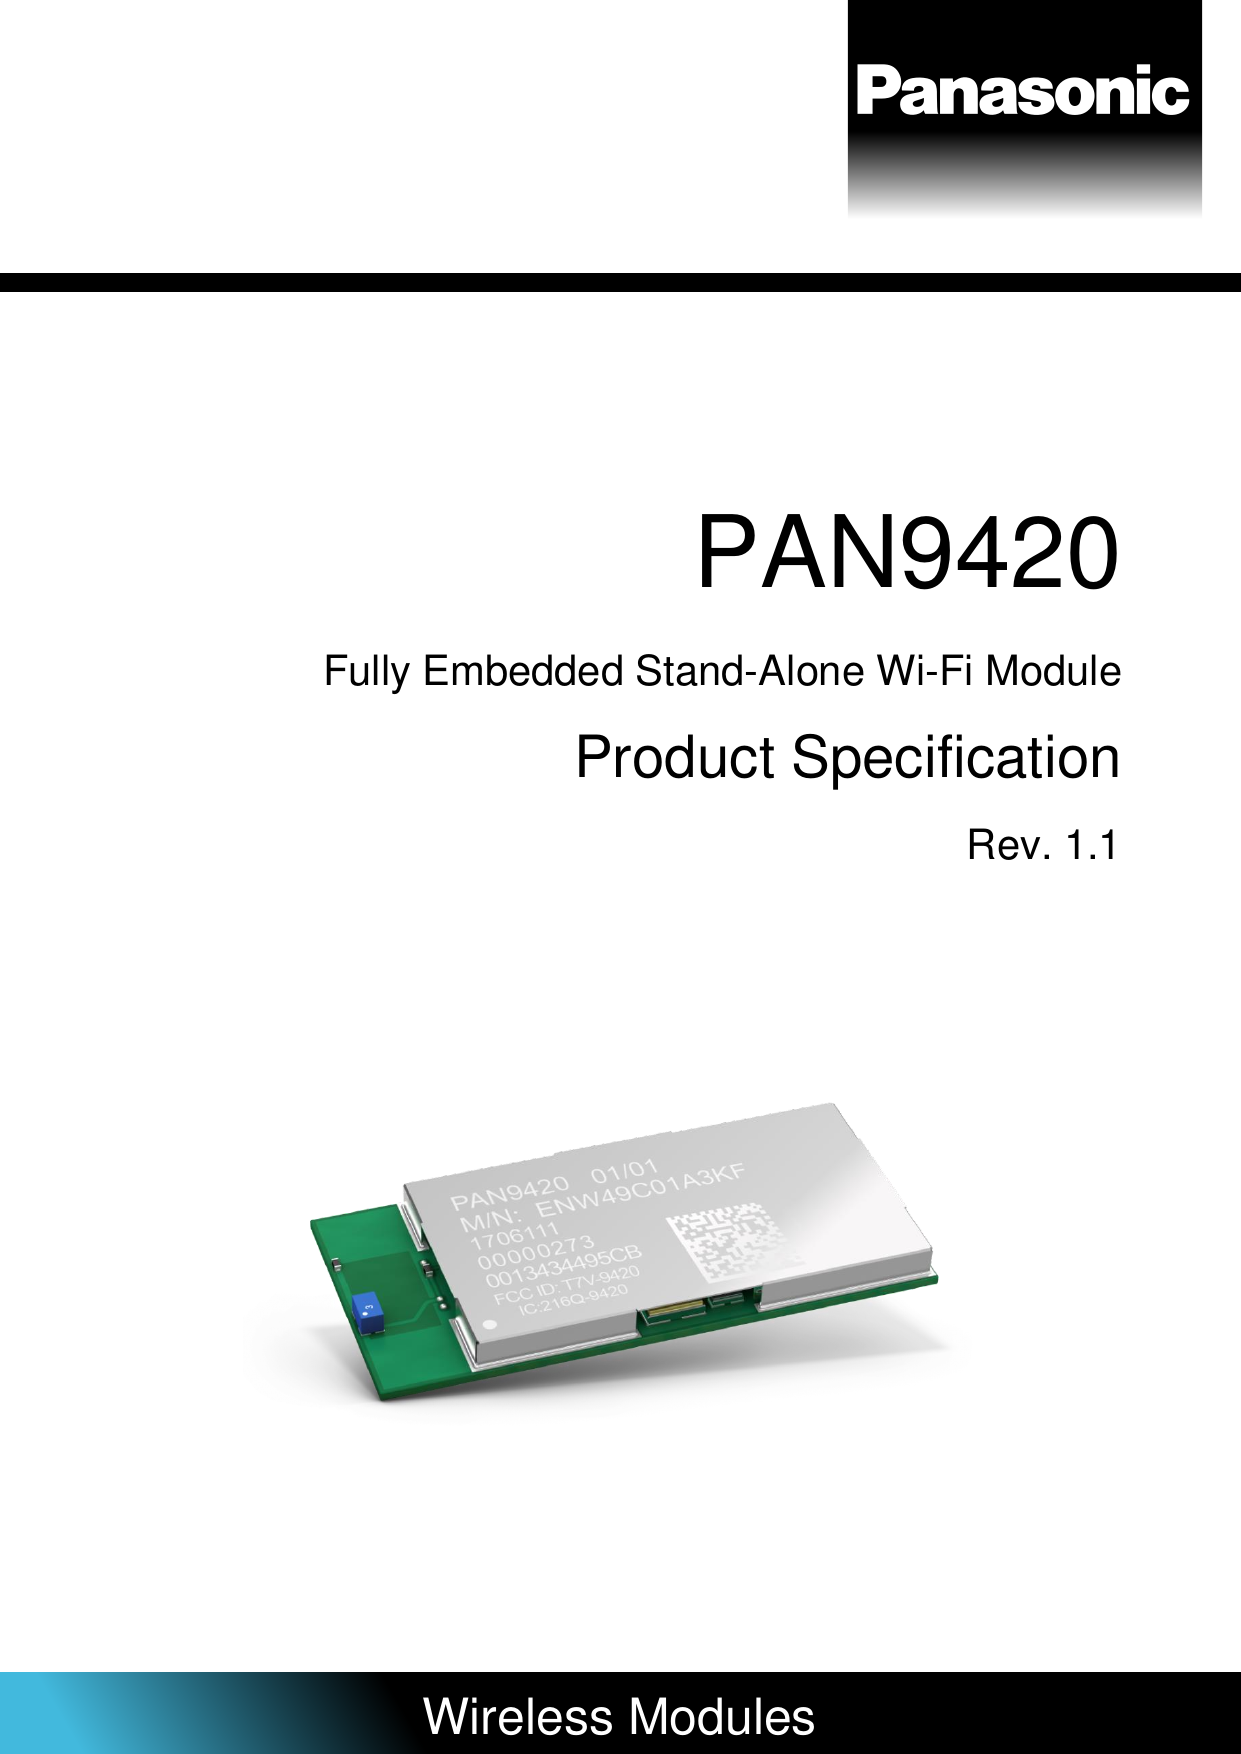             PAN9420 Fully Embedded Stand-Alone Wi-Fi Module Product Specification Rev. 1.1                 Wireless Modules   